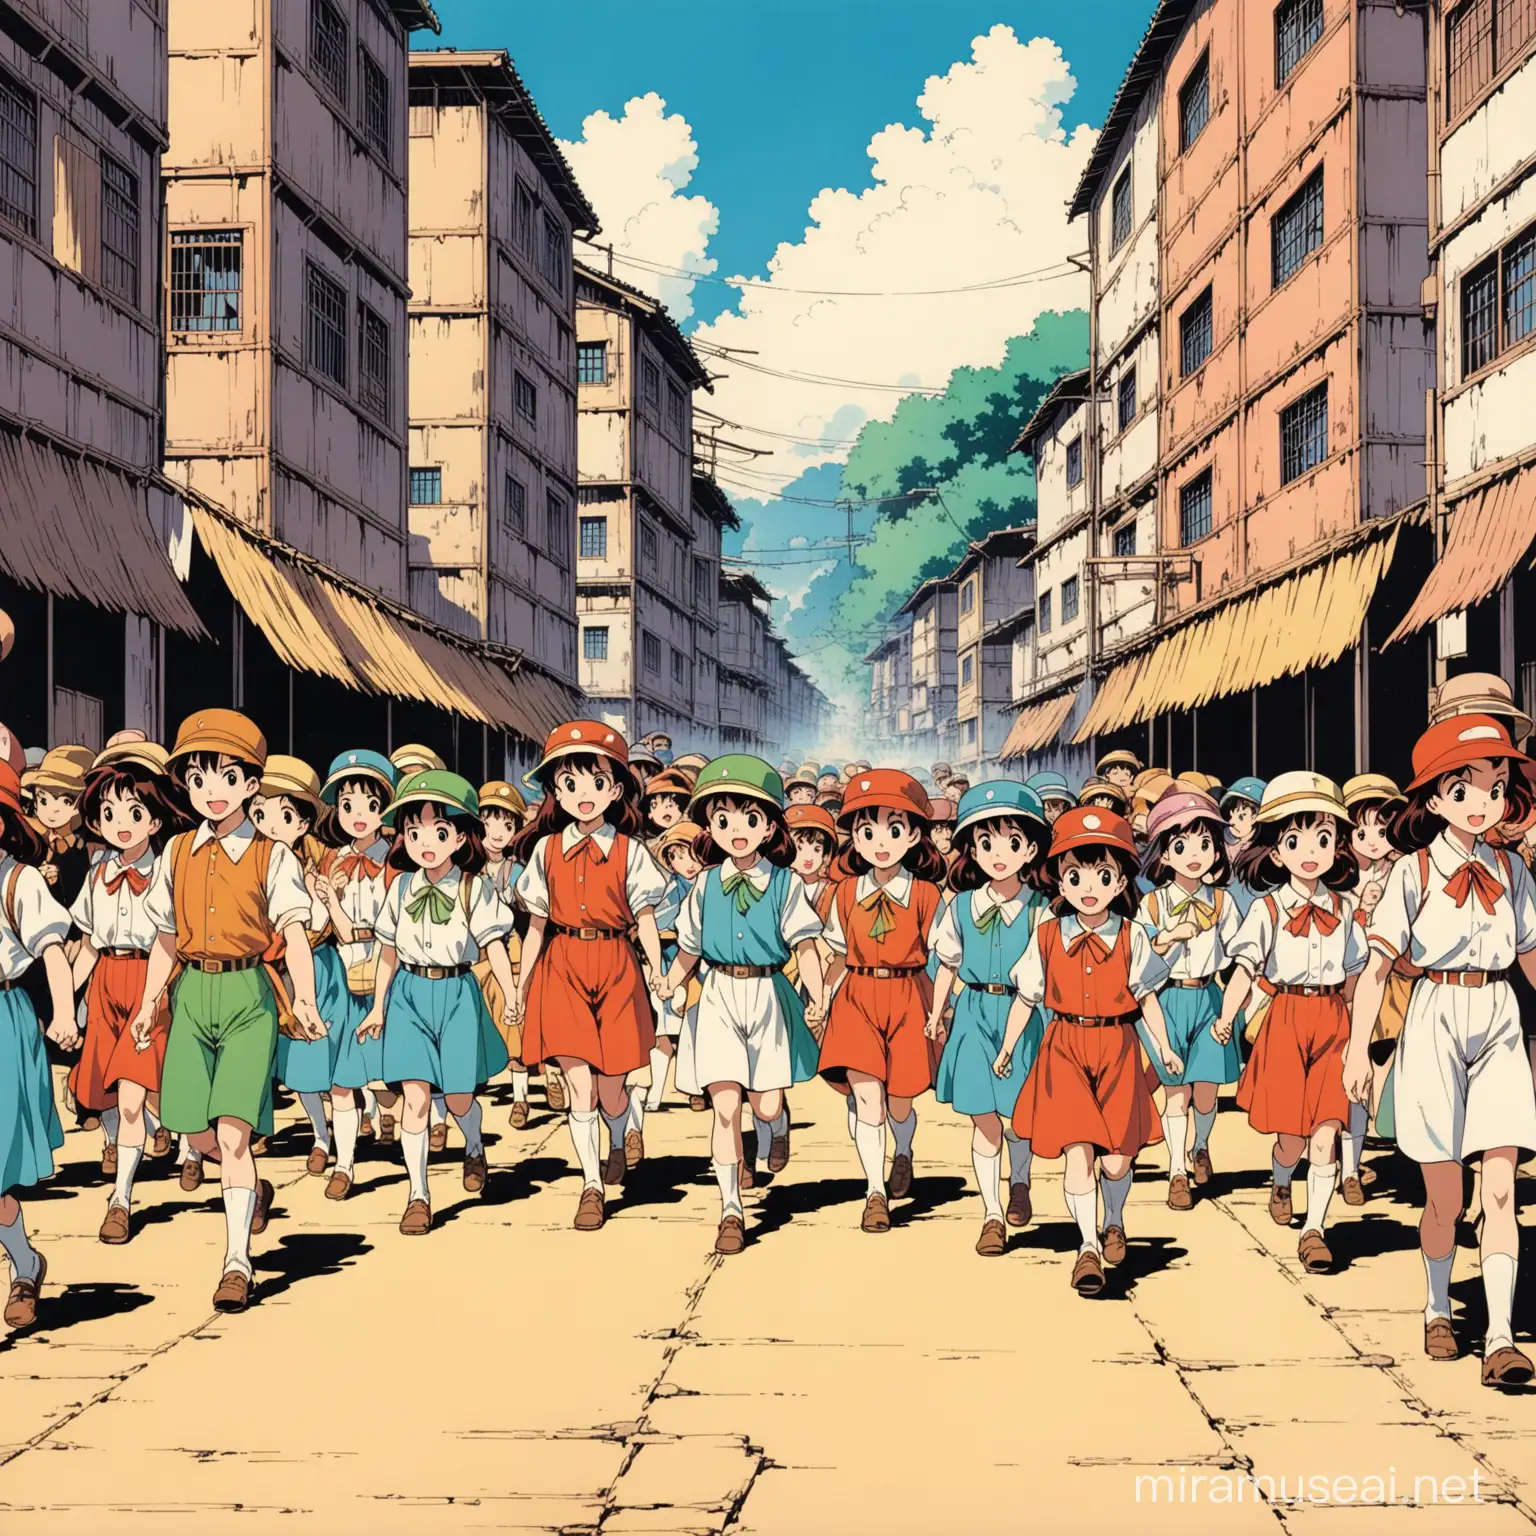 Vintage Anime Camp Guide Leading Children Through the City